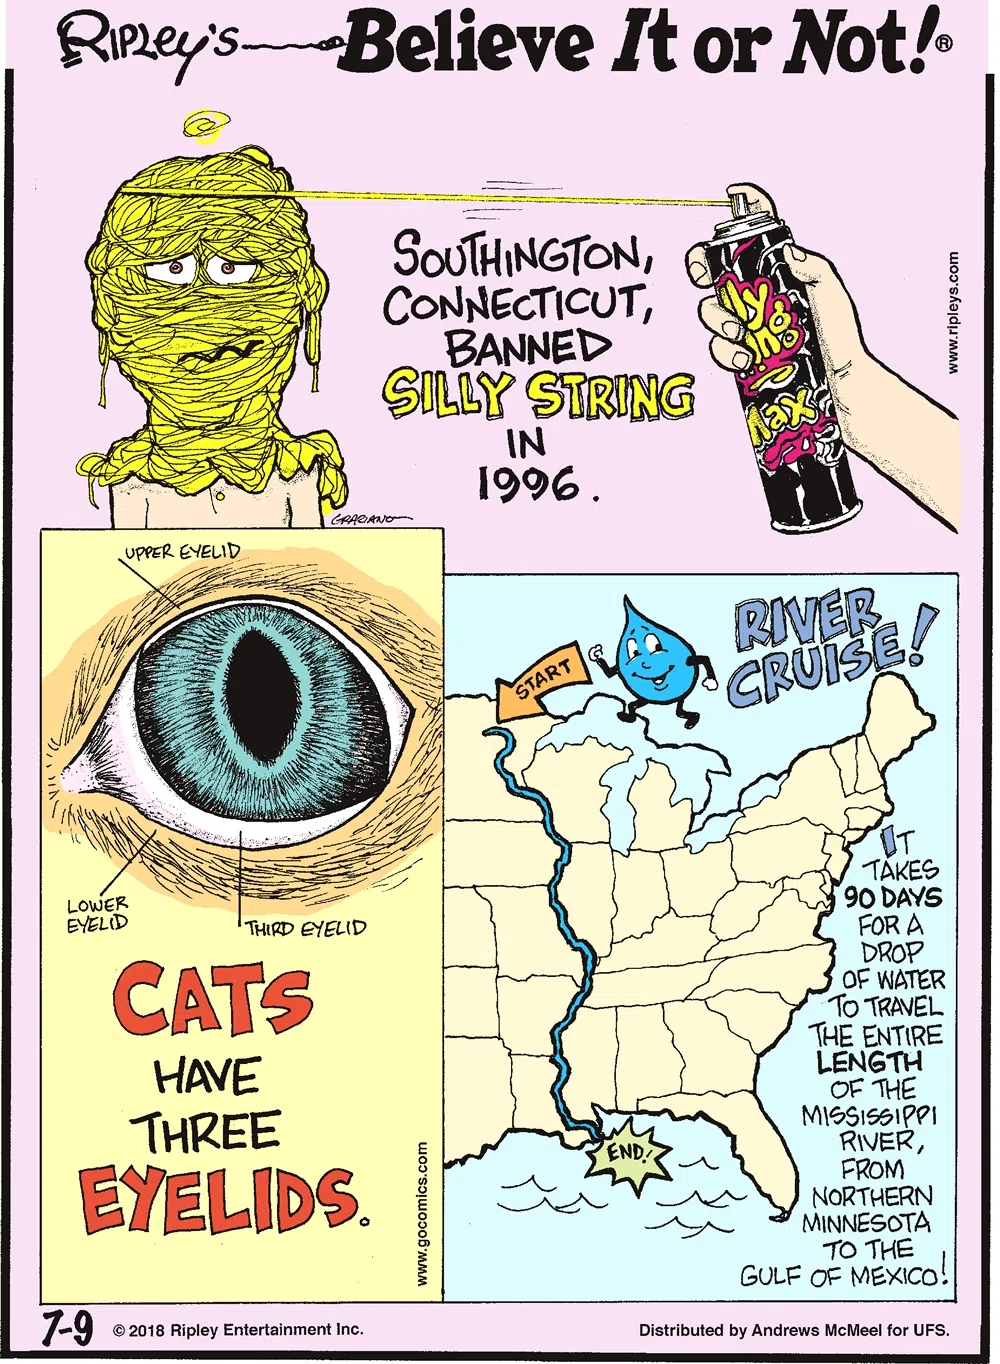 Southington, Connecticut, banned Silly String in 1996.-------------------- Cats have three eyelids.-------------------- It takes 90 days for a drop of water to travel the entire length of the Mississippi River, from northern Minnesota to the Gulf of Mexico!